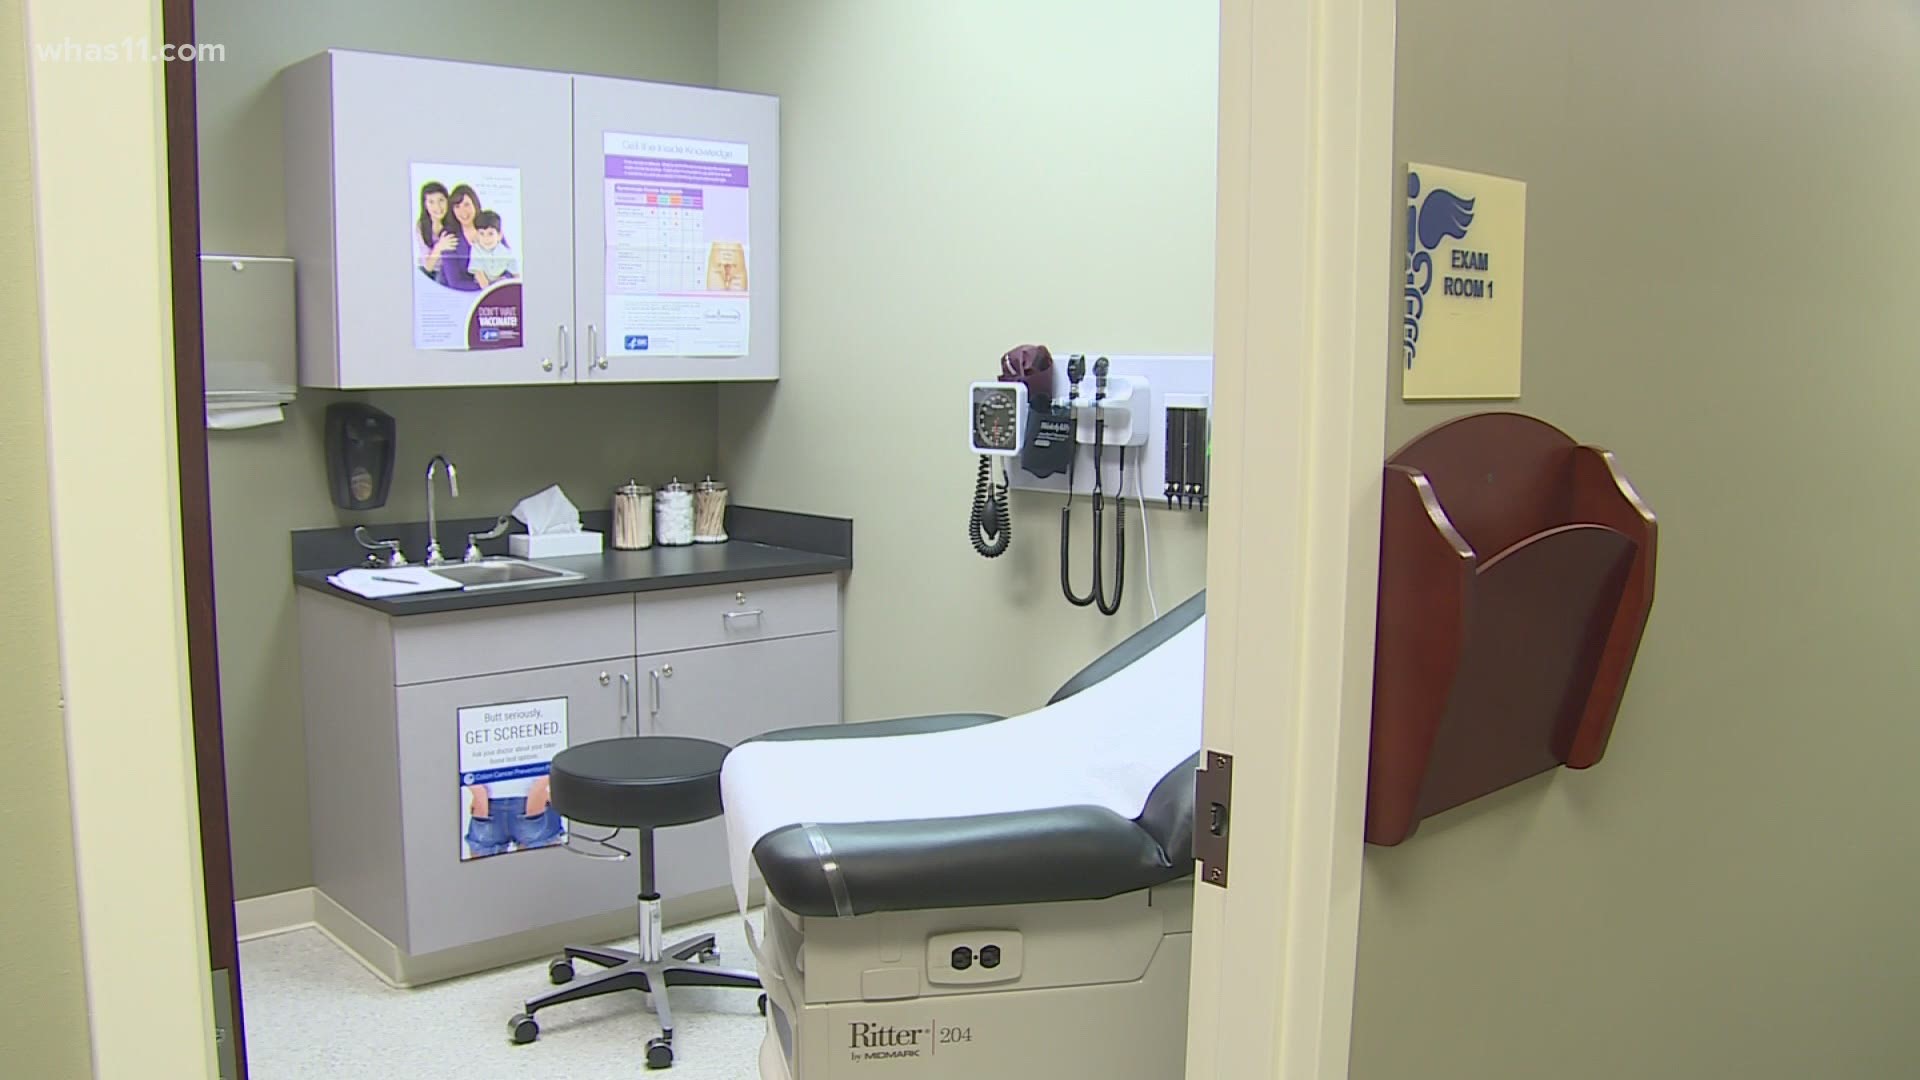 More young people are being diagnosed with colon cancer now than a decade ago. A University of Louisville doctor talks about the signs to look for.